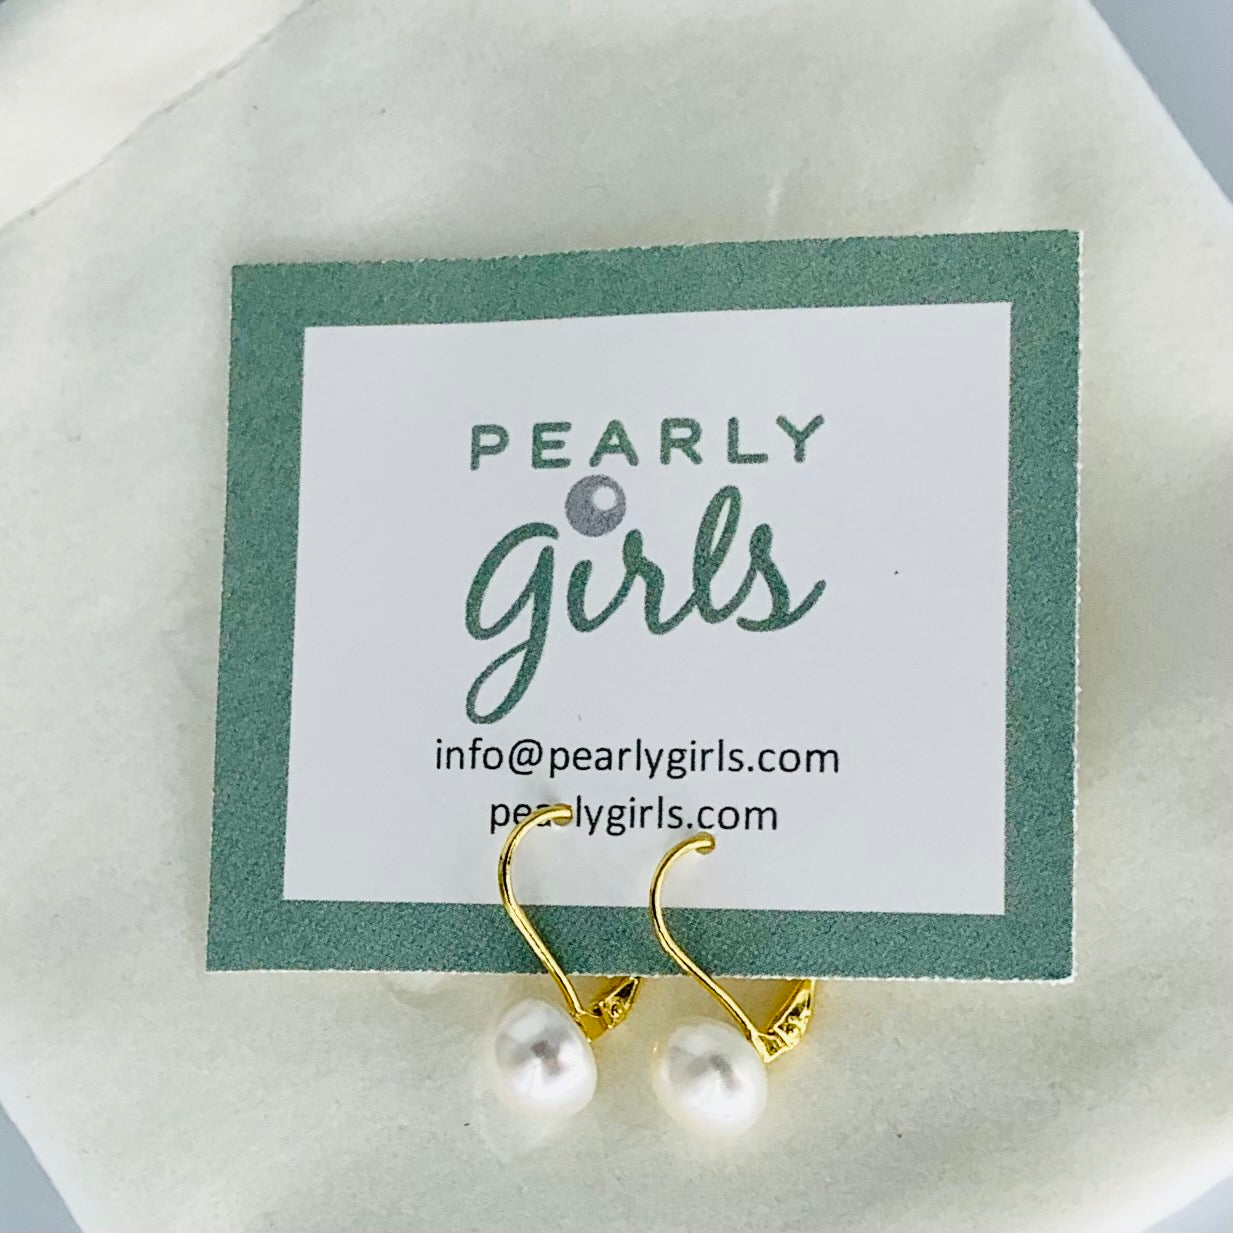 Pearl Earrings on Gold French Hooks